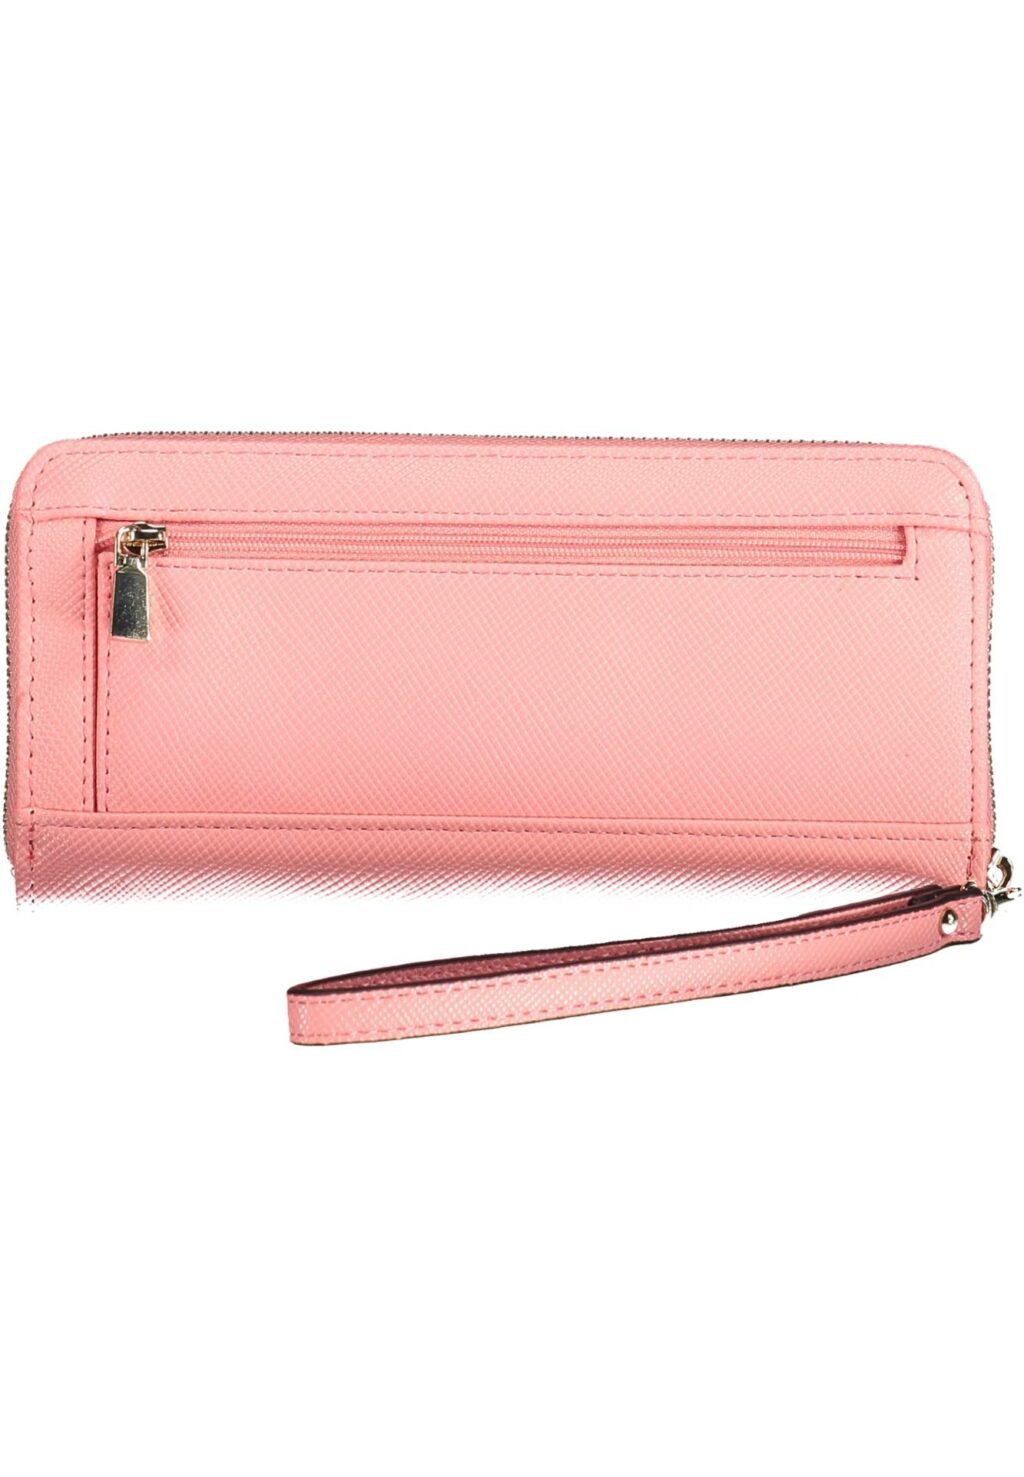 GUESS JEANS WOMEN'S PINK WALLET ZG850046_ROSA_PINK